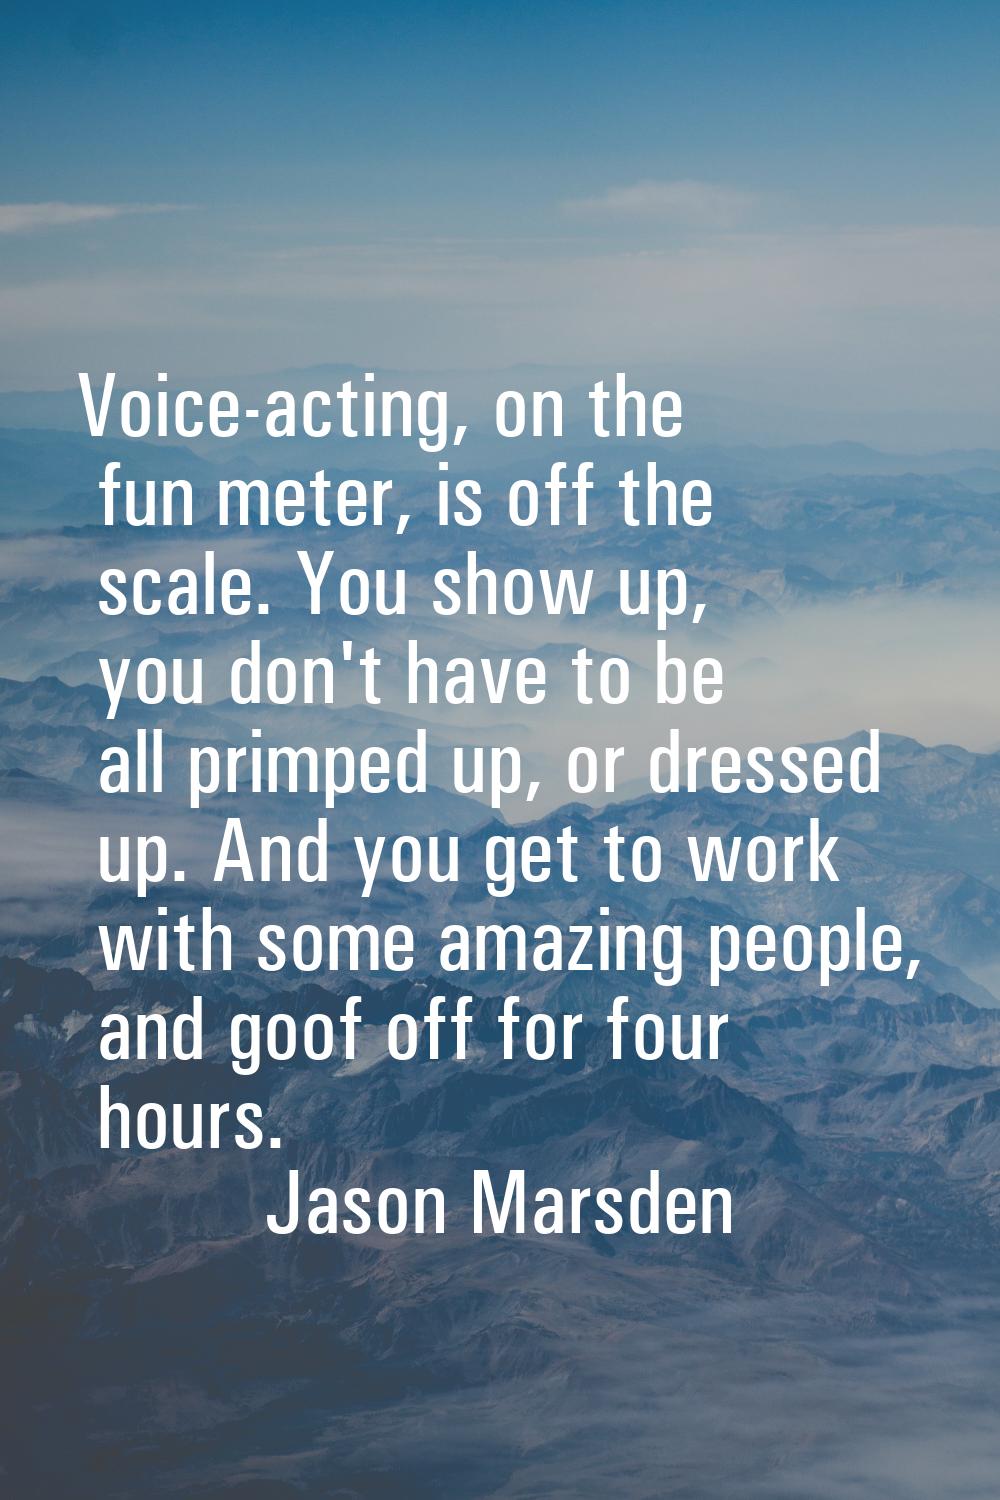 Voice-acting, on the fun meter, is off the scale. You show up, you don't have to be all primped up,